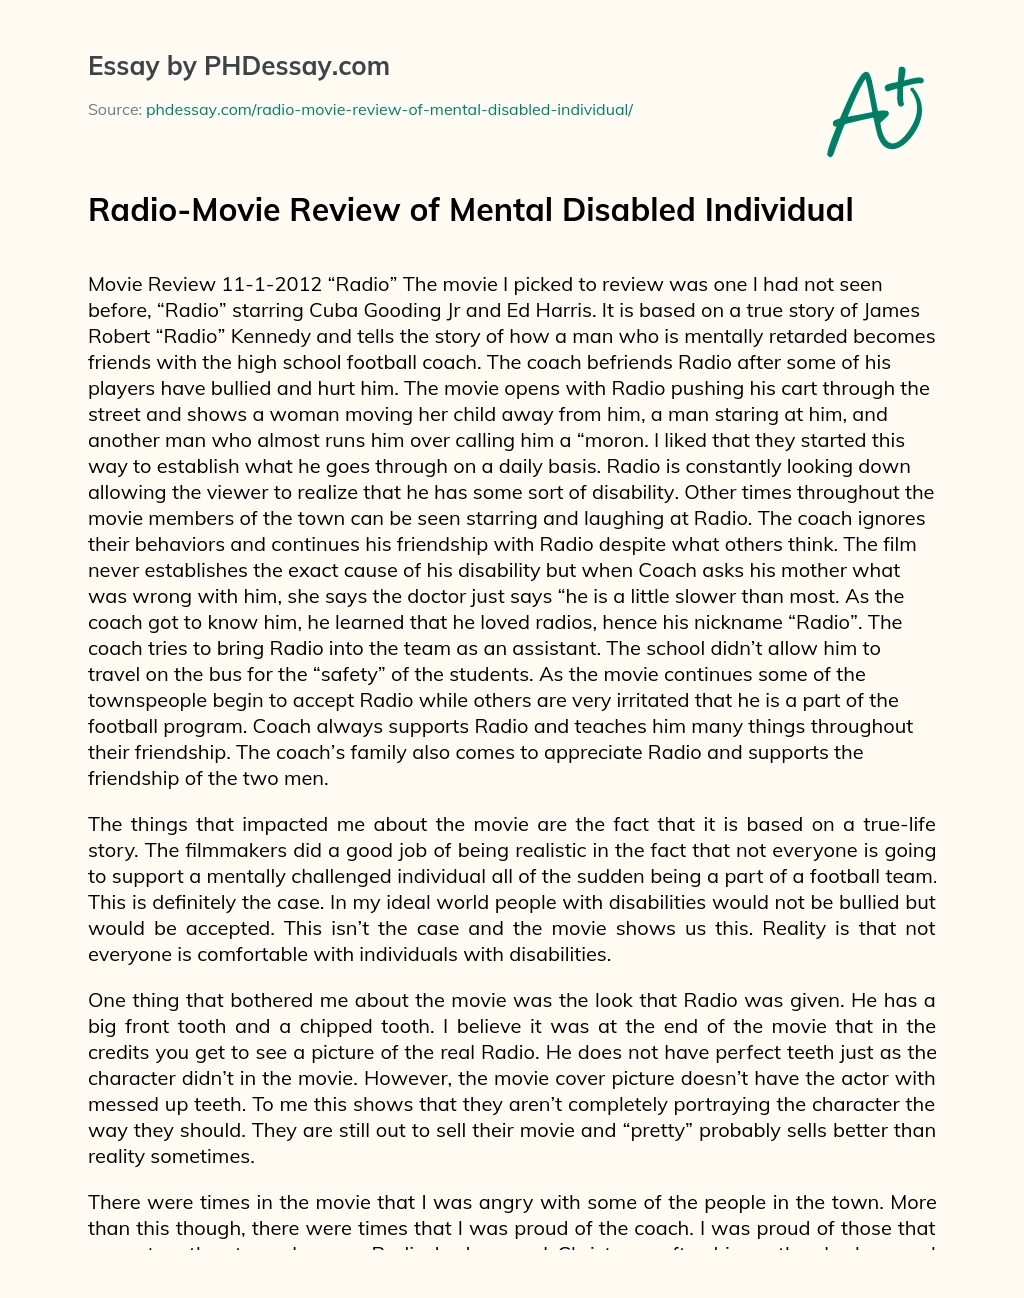 Radio-Movie Review of Mental Disabled Individual essay